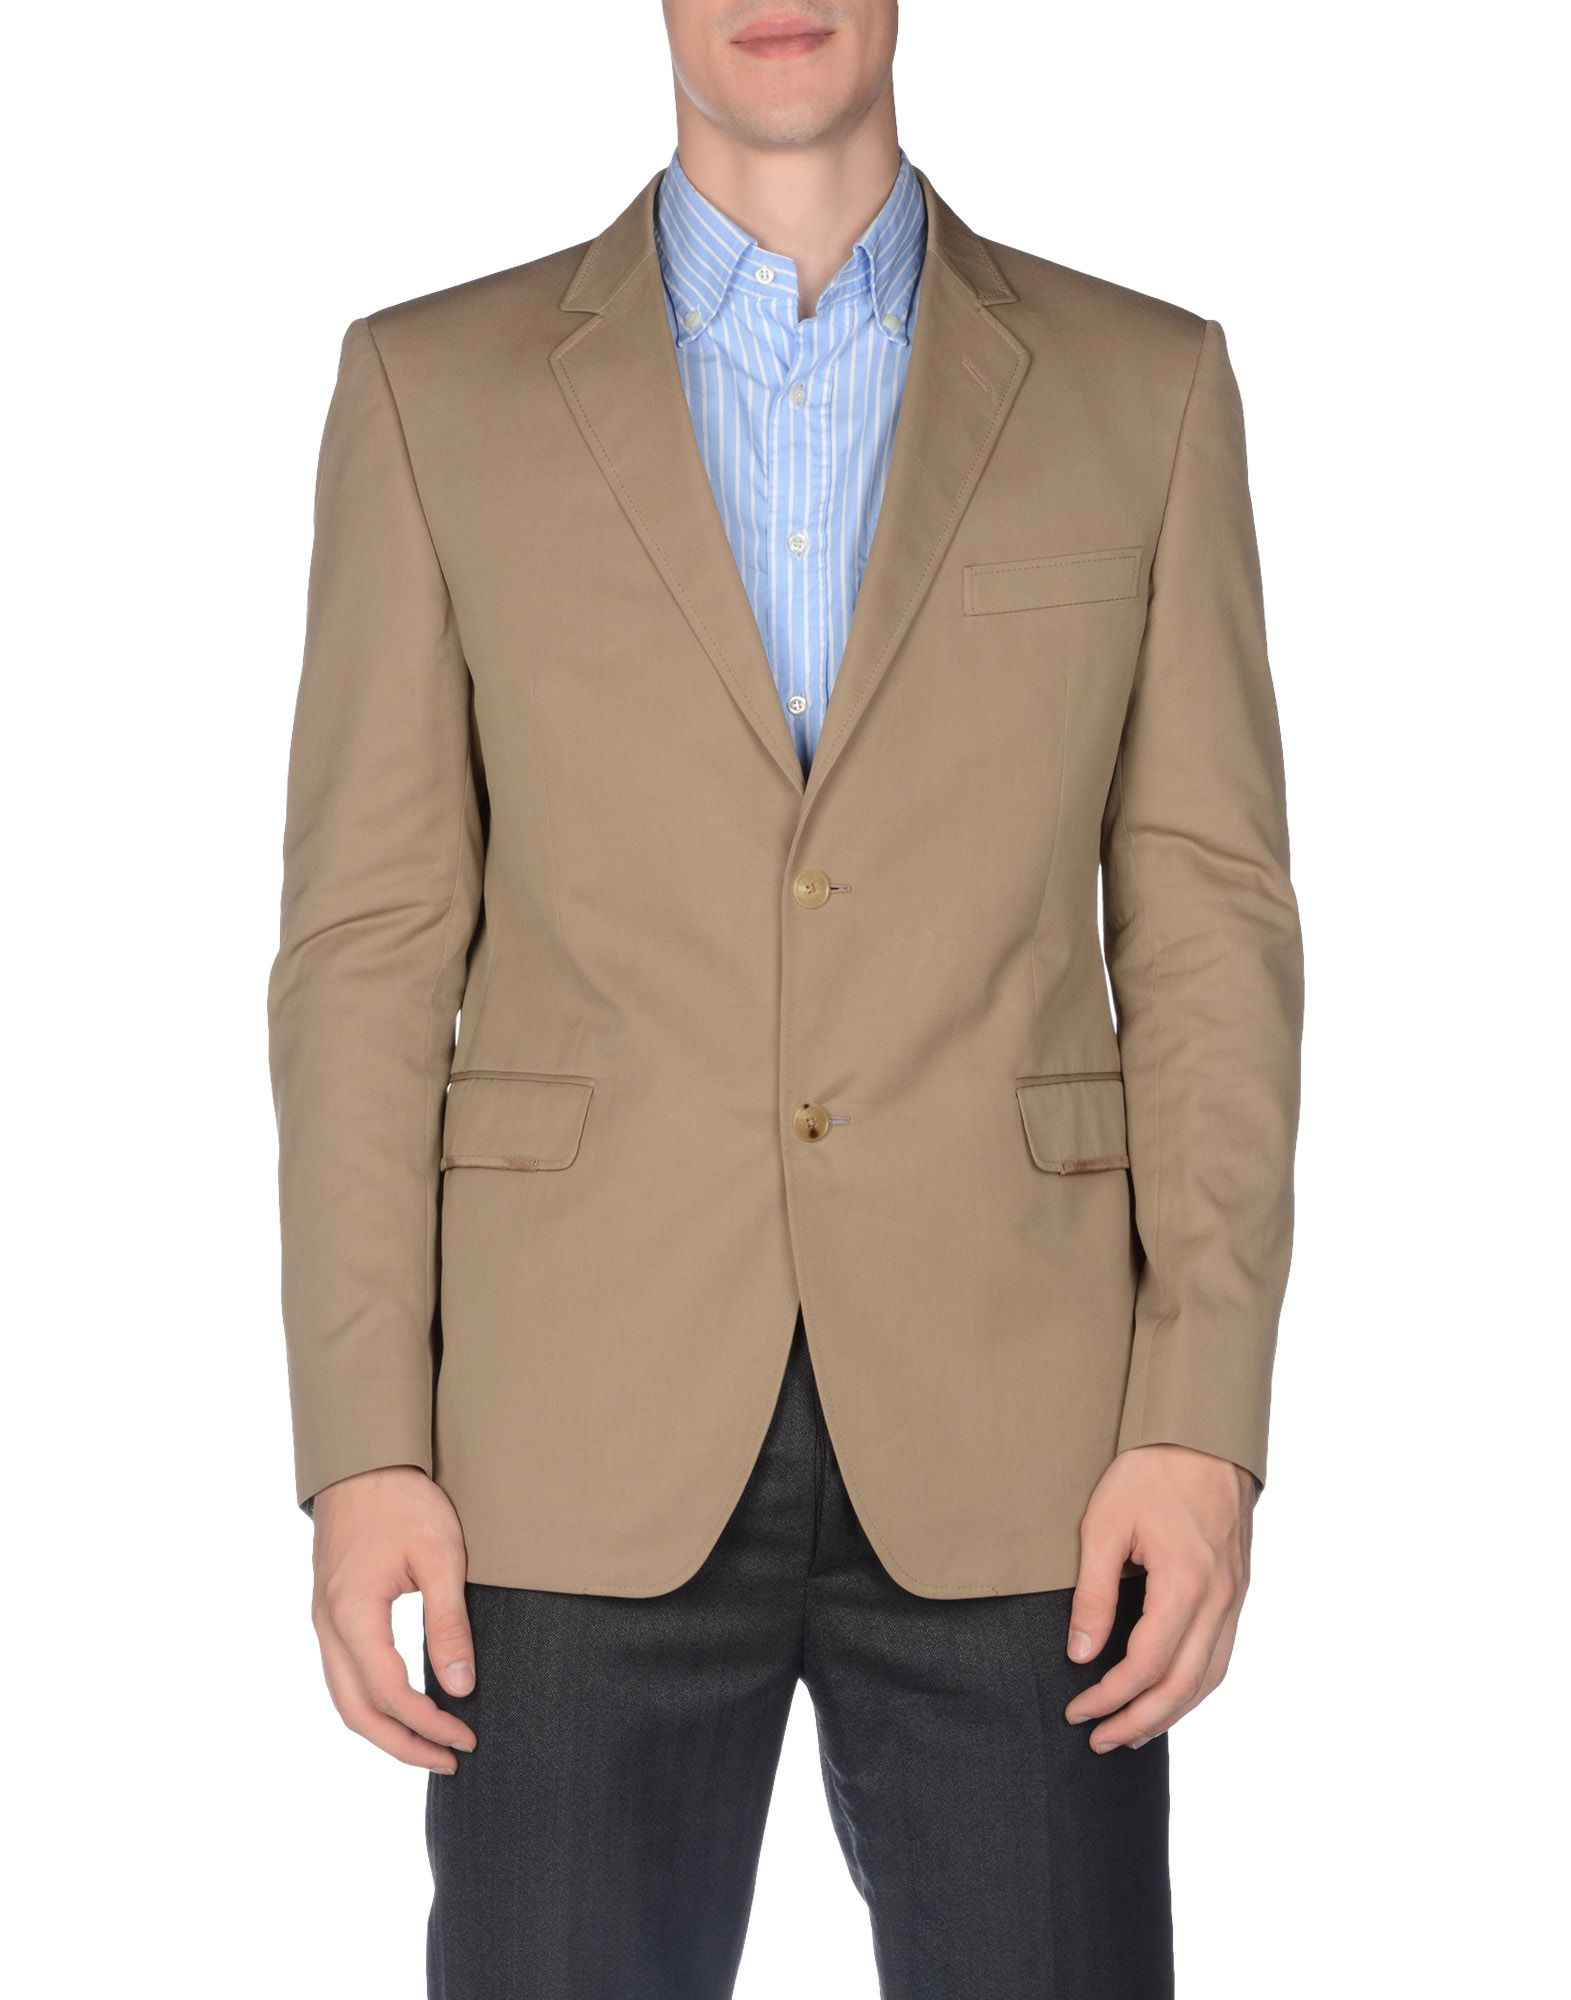 Lyst Gucci  Blazer  in Natural for Men